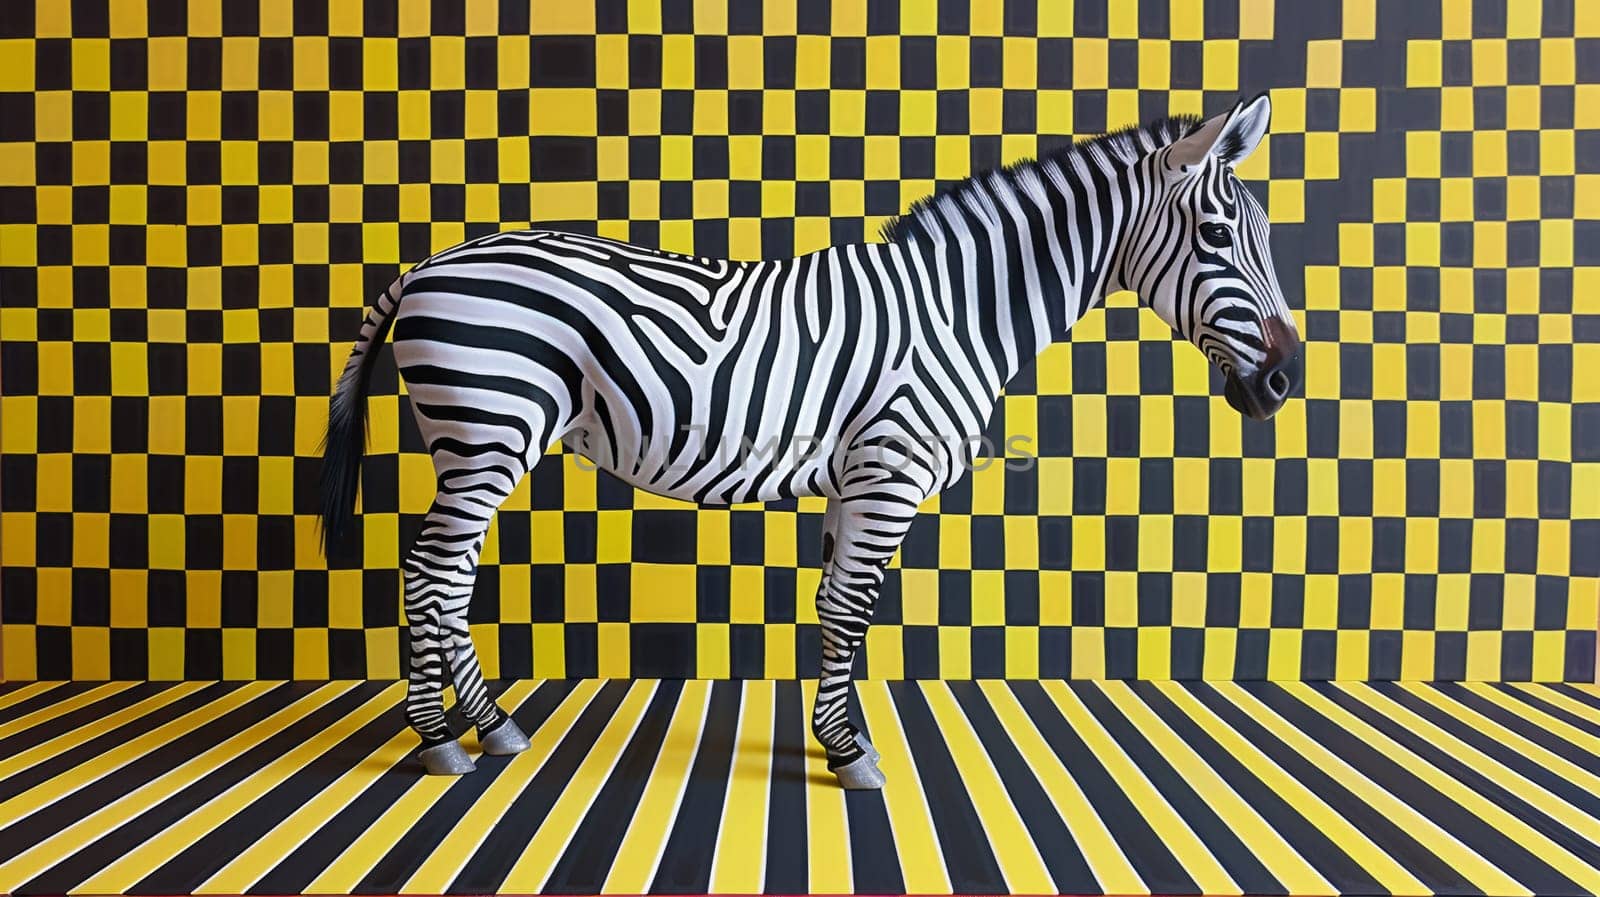 A zebra standing on a checkered floor in front of yellow and black background